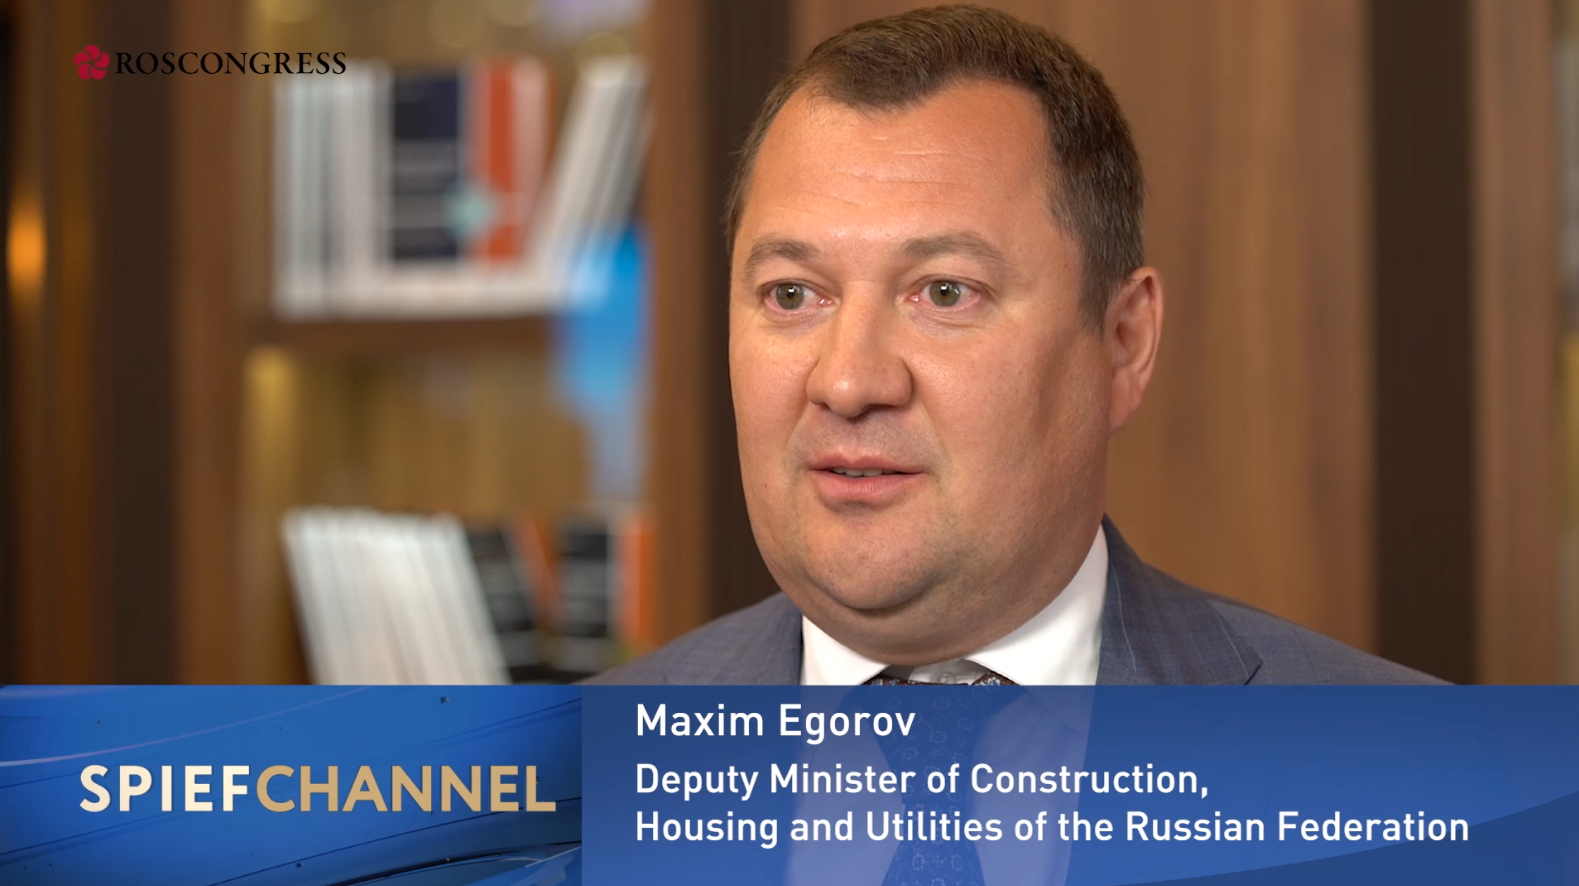 Maxim Egorov, Deputy Minister of Construction, Housing, and Utilities of the Russian Federation